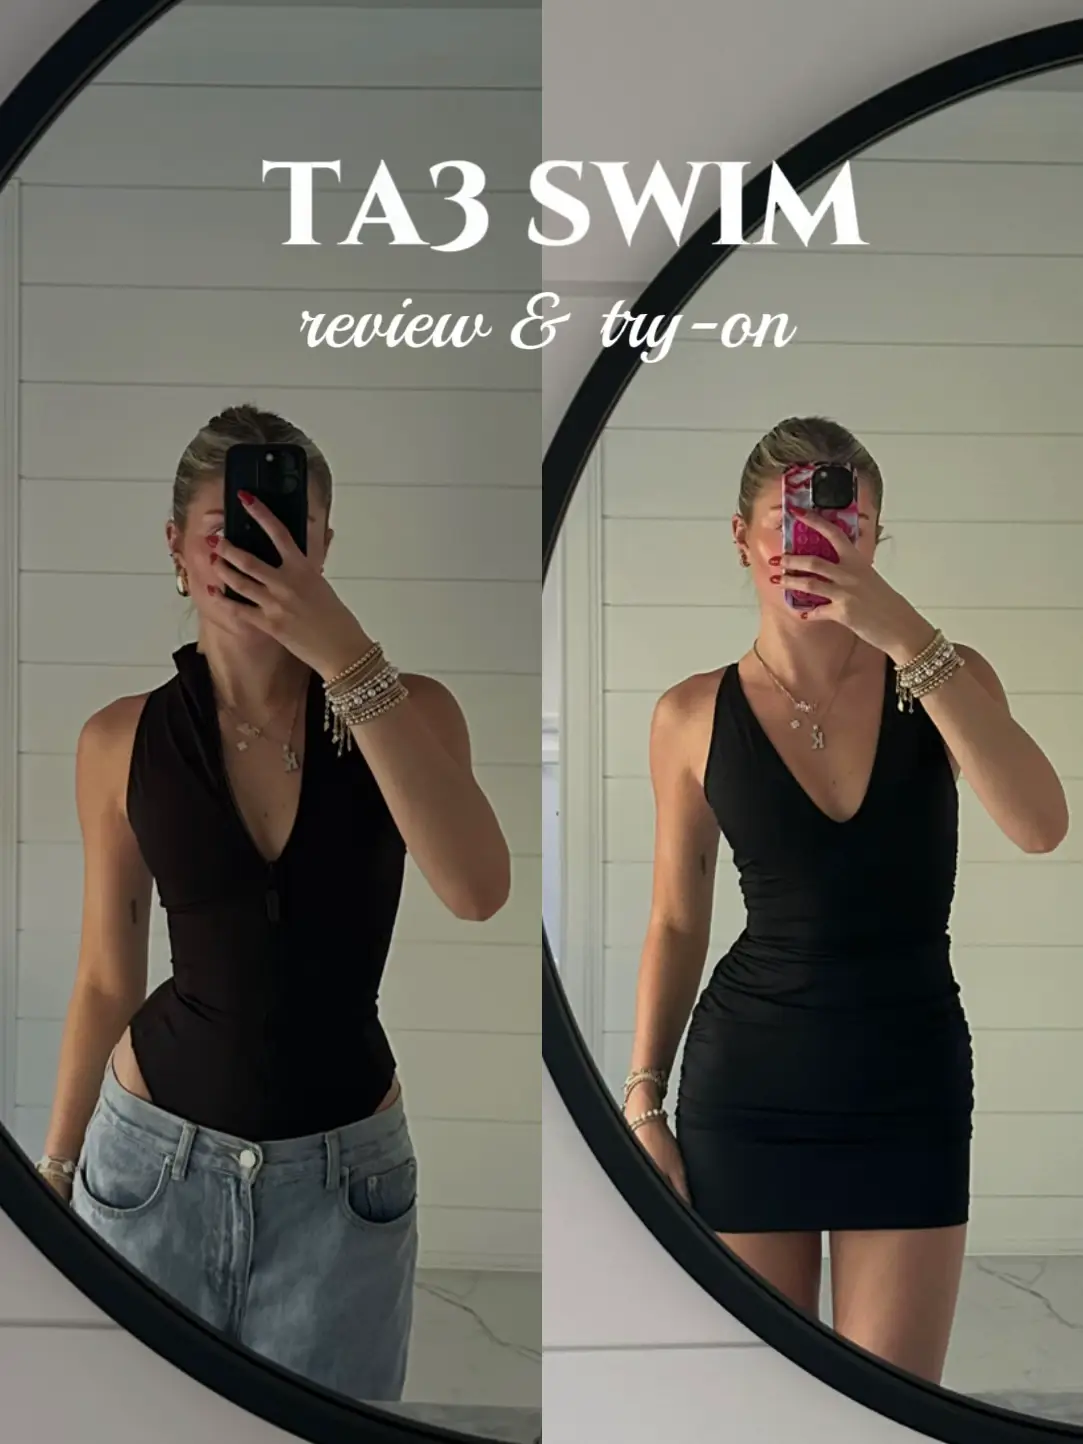 TA3 Swim review & try-on, Gallery posted by Kylie Boyd